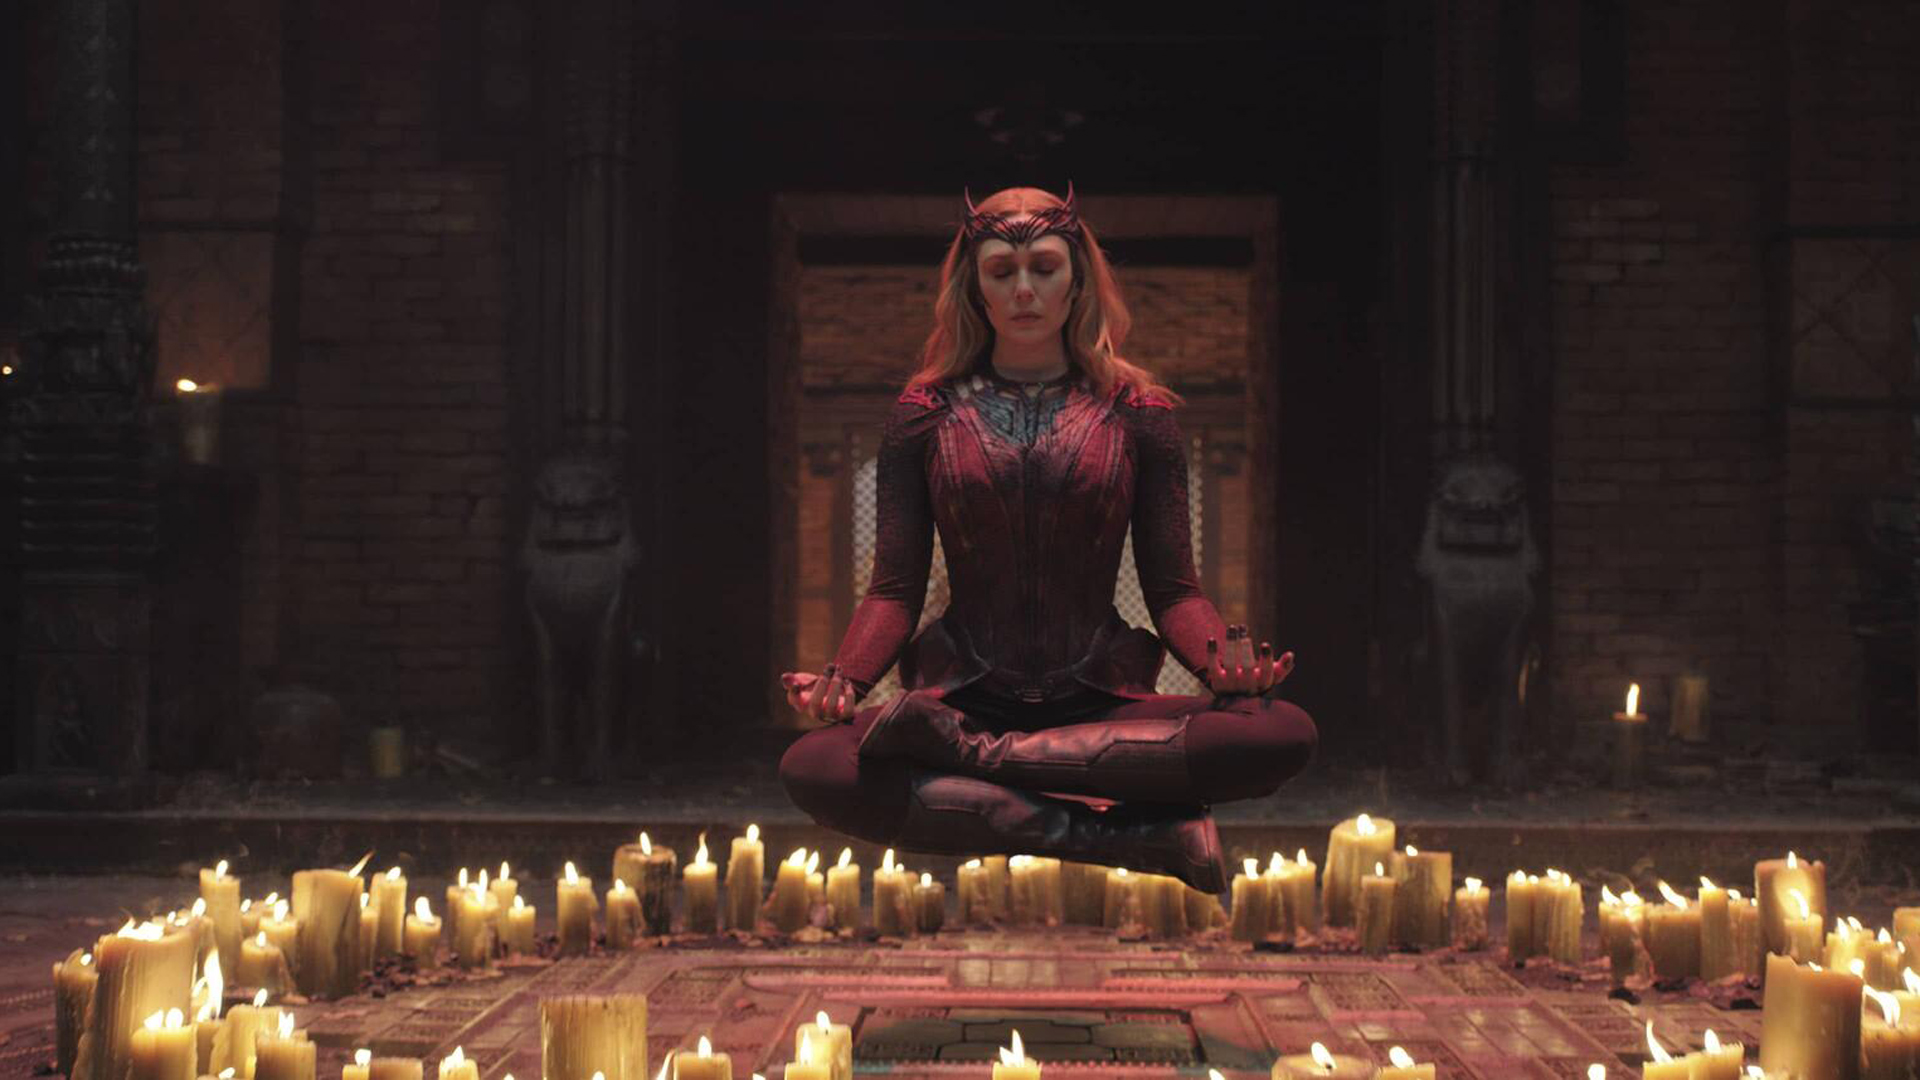 Wanda Maximoff conducts a magical seance in Doctor Strange in the Multiverse of Madness